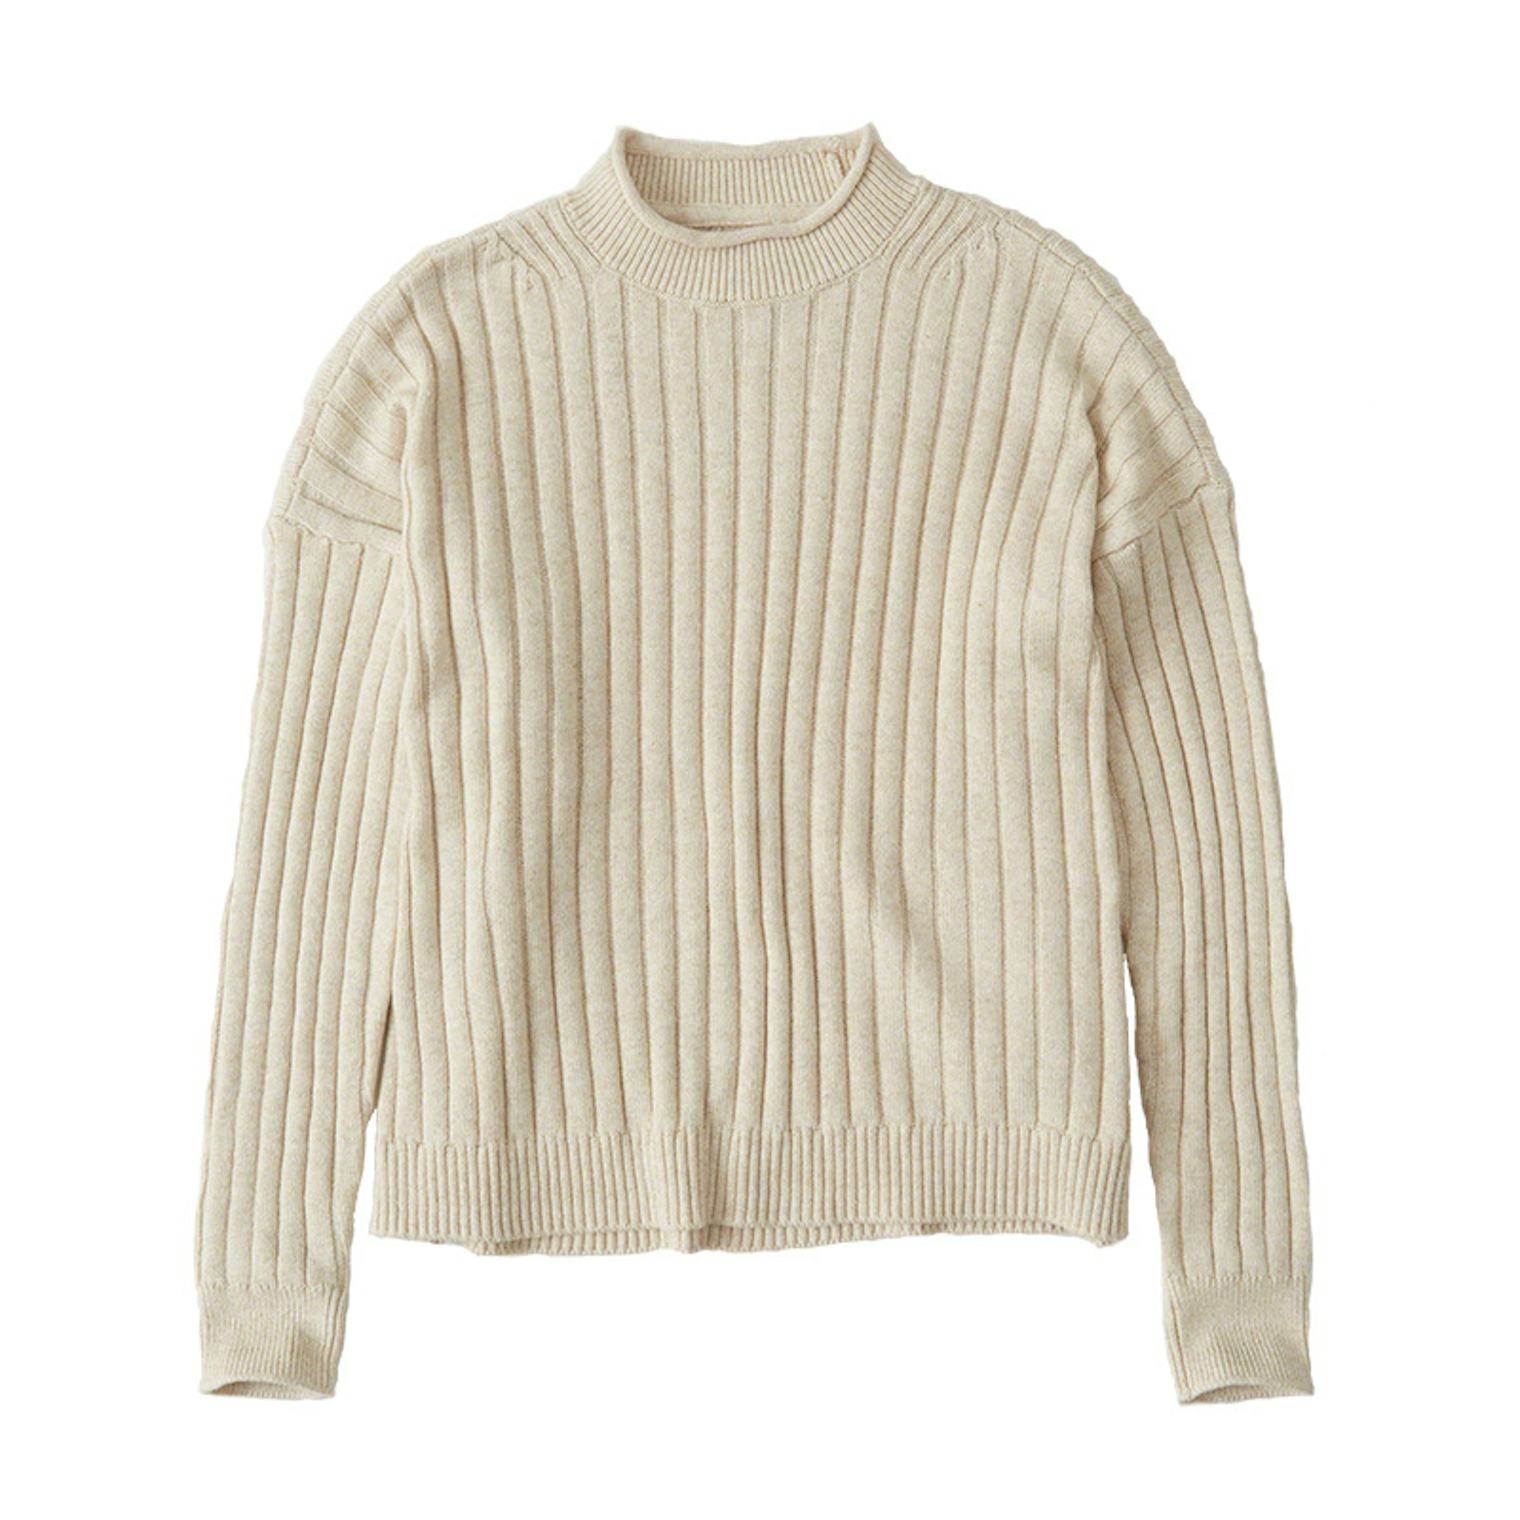 Under-$75 Sweaters You Can Wear With Everything